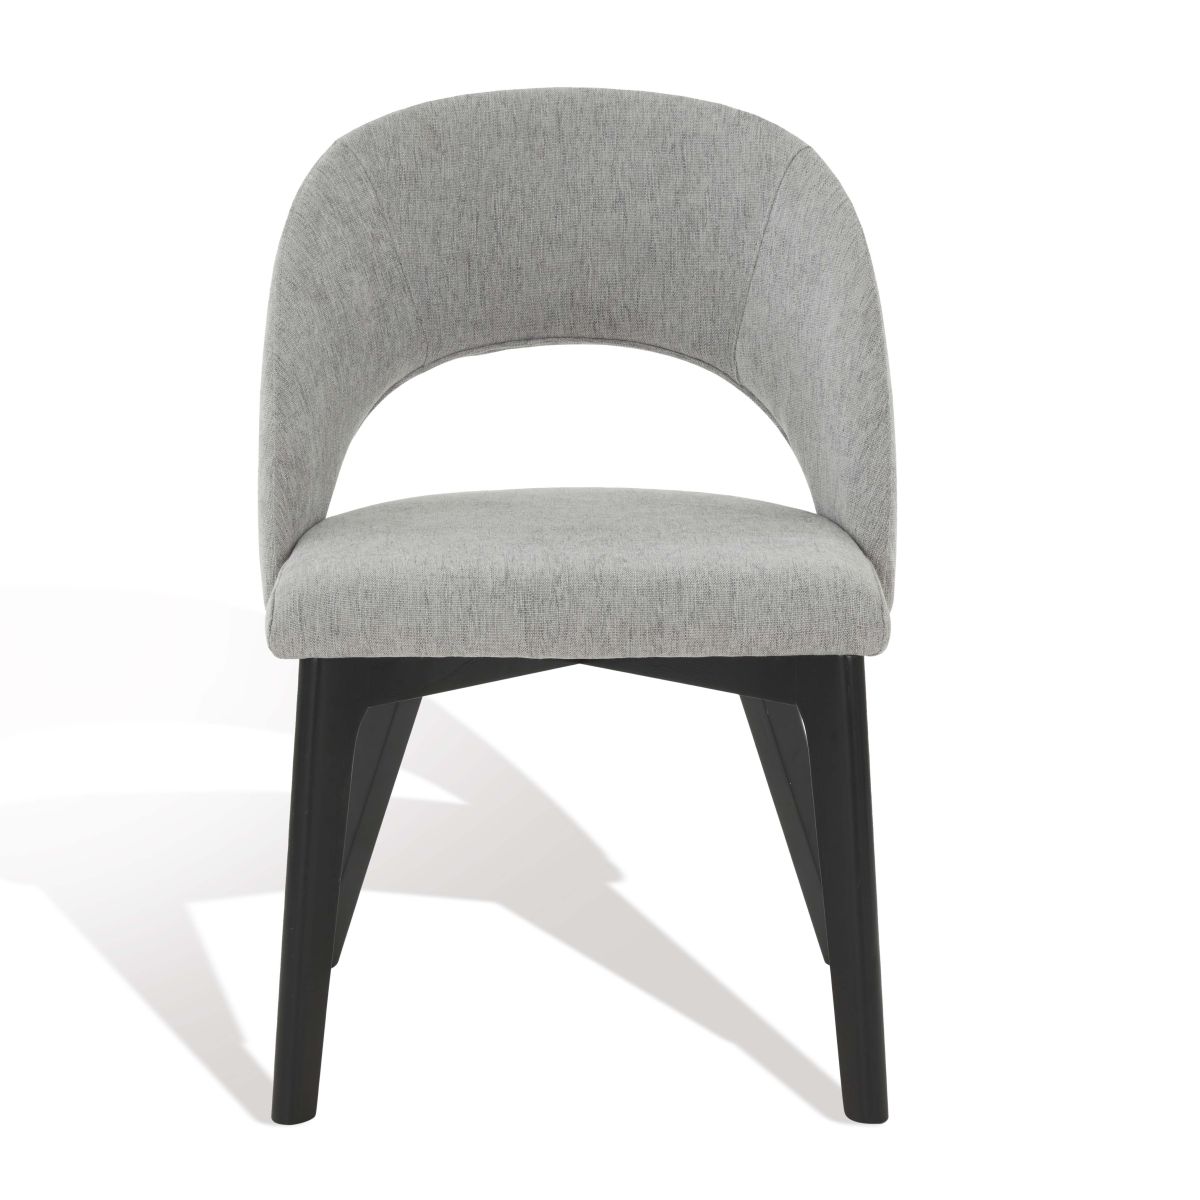 Safavieh Couture Rowland Linen Dining Chair - Grey / Black